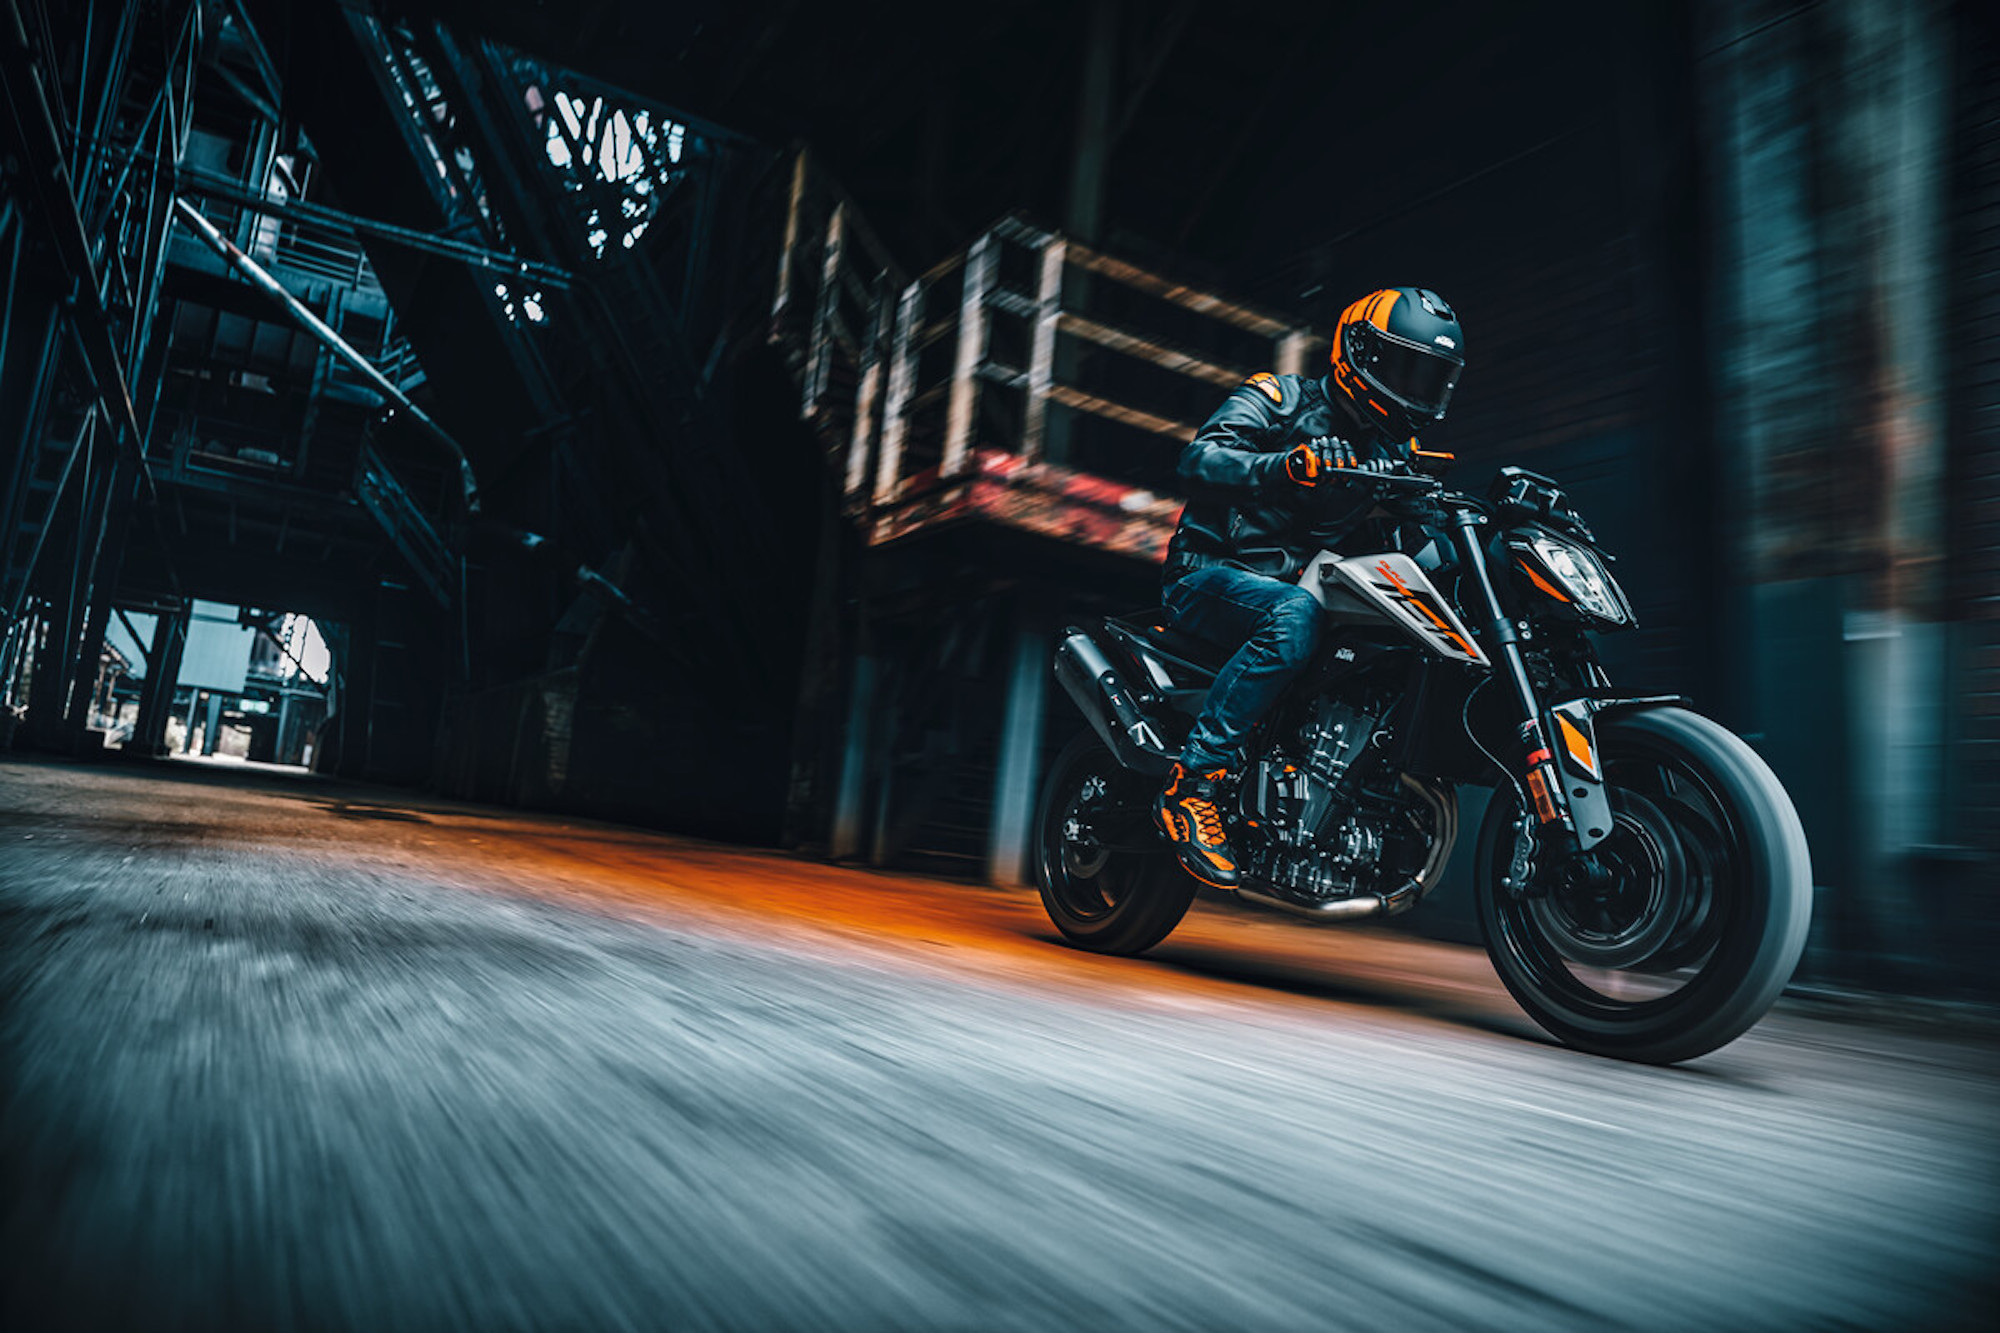 the 2023 KTM 790 Duke, which is back for the new season! Media sourced from KTM's press release.